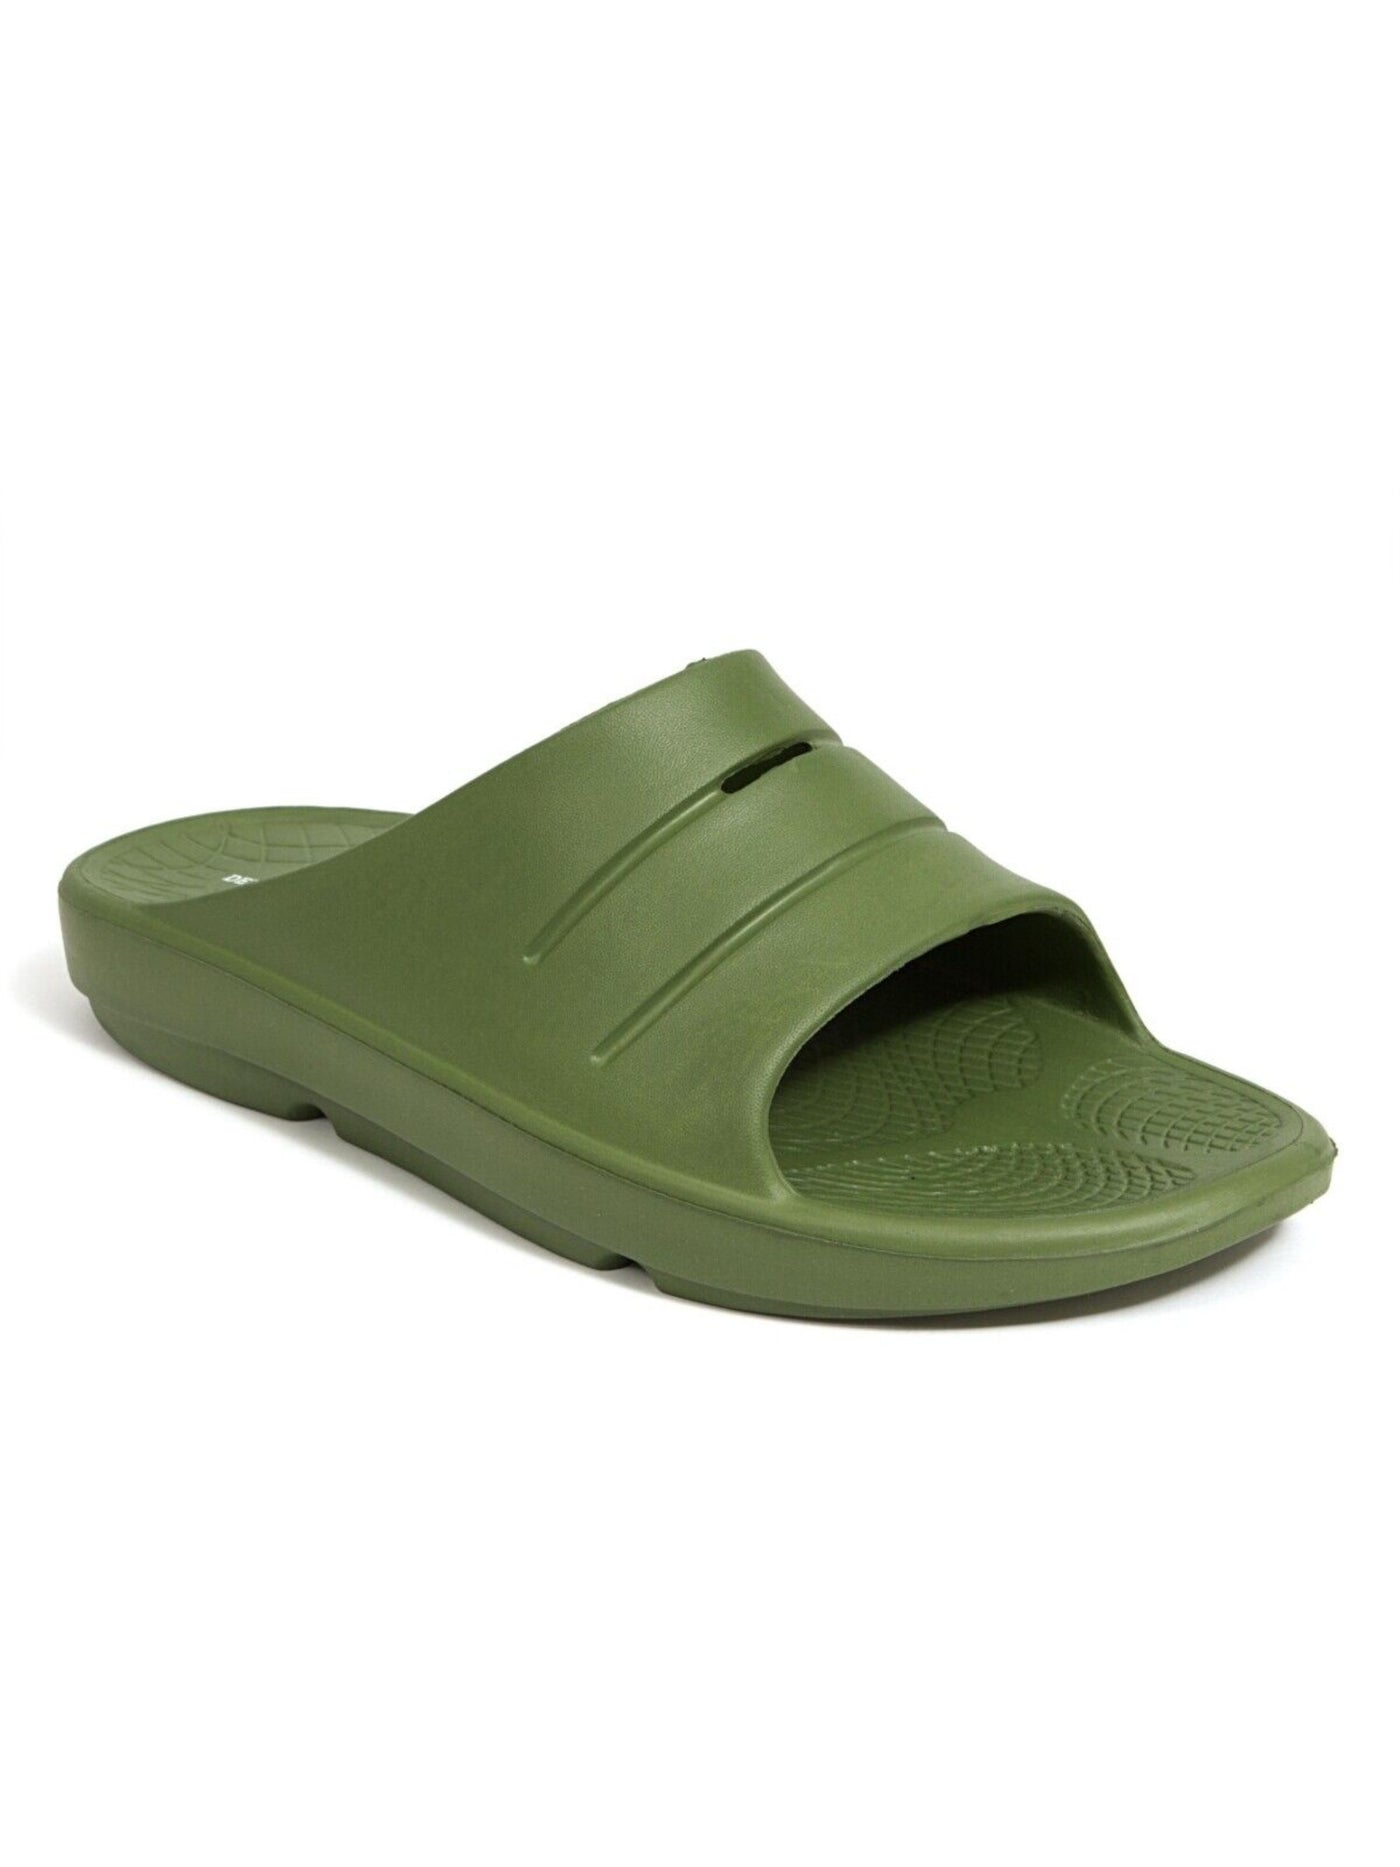 DEER STAGS Mens Green Molded Footbed Cushioned Ward Round Toe Slip On Slide Sandals Shoes 10 M